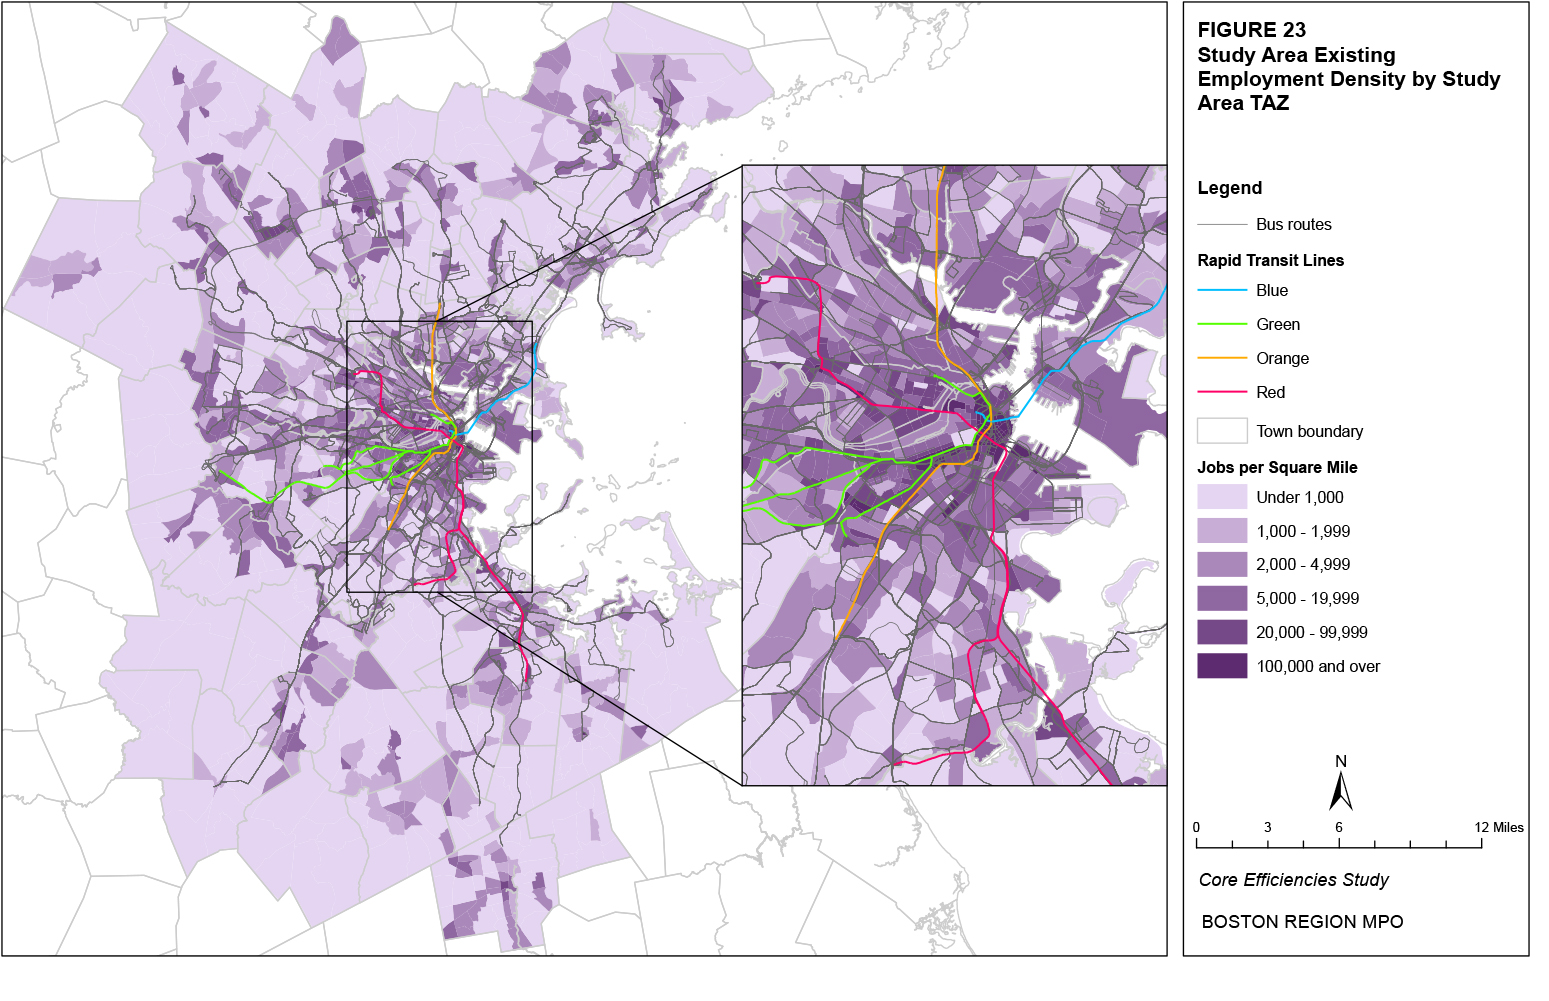 This map shows the employment density (jobs per square mile) by TAZ.